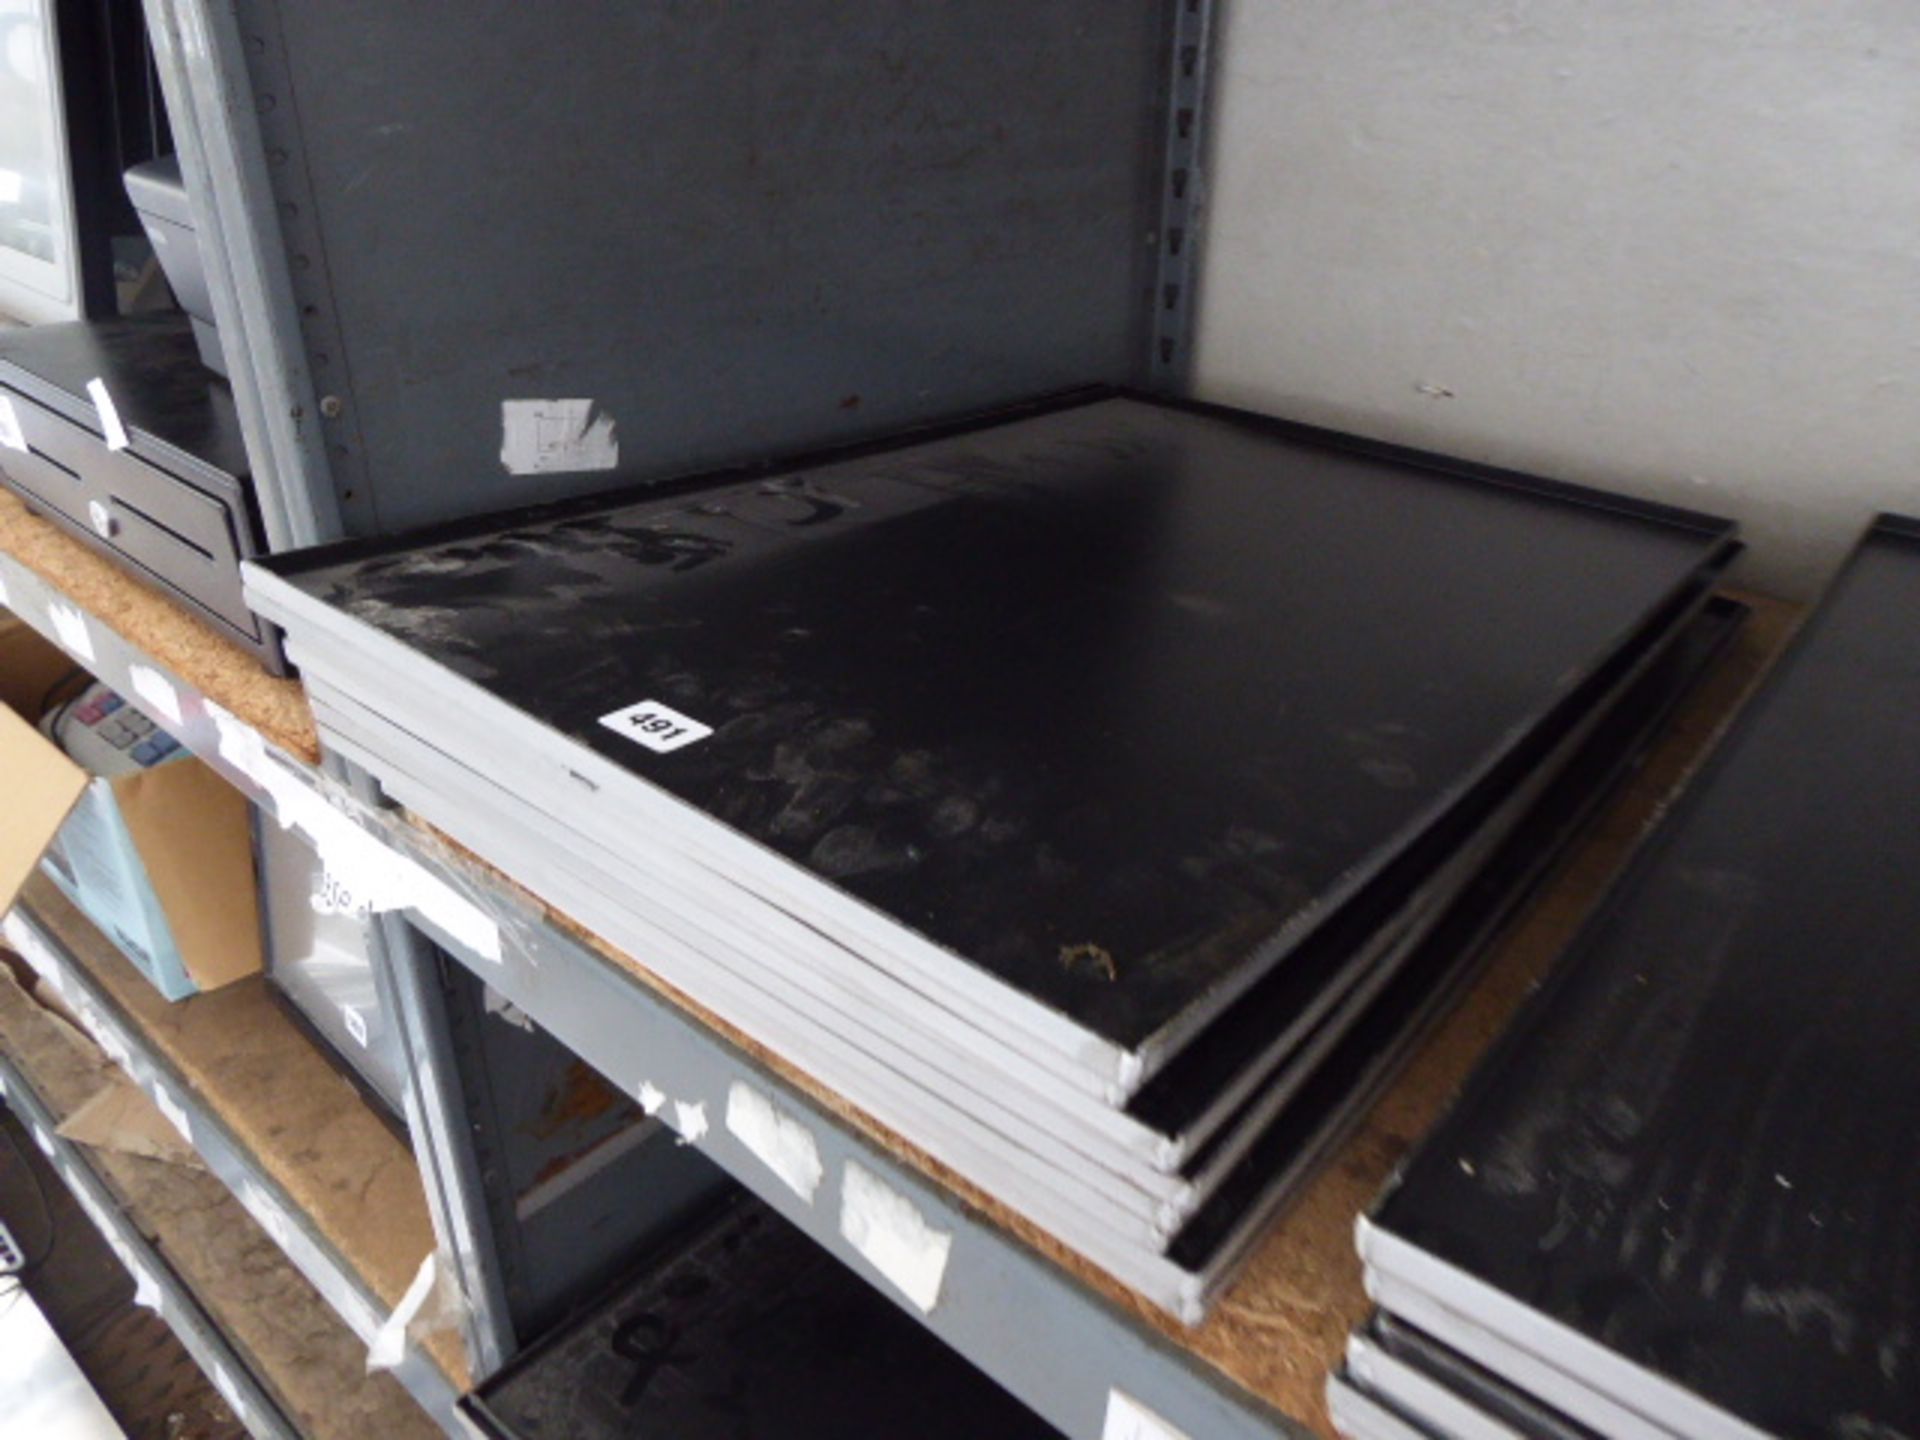 Approx 8 60cm x 40cm bakers trays